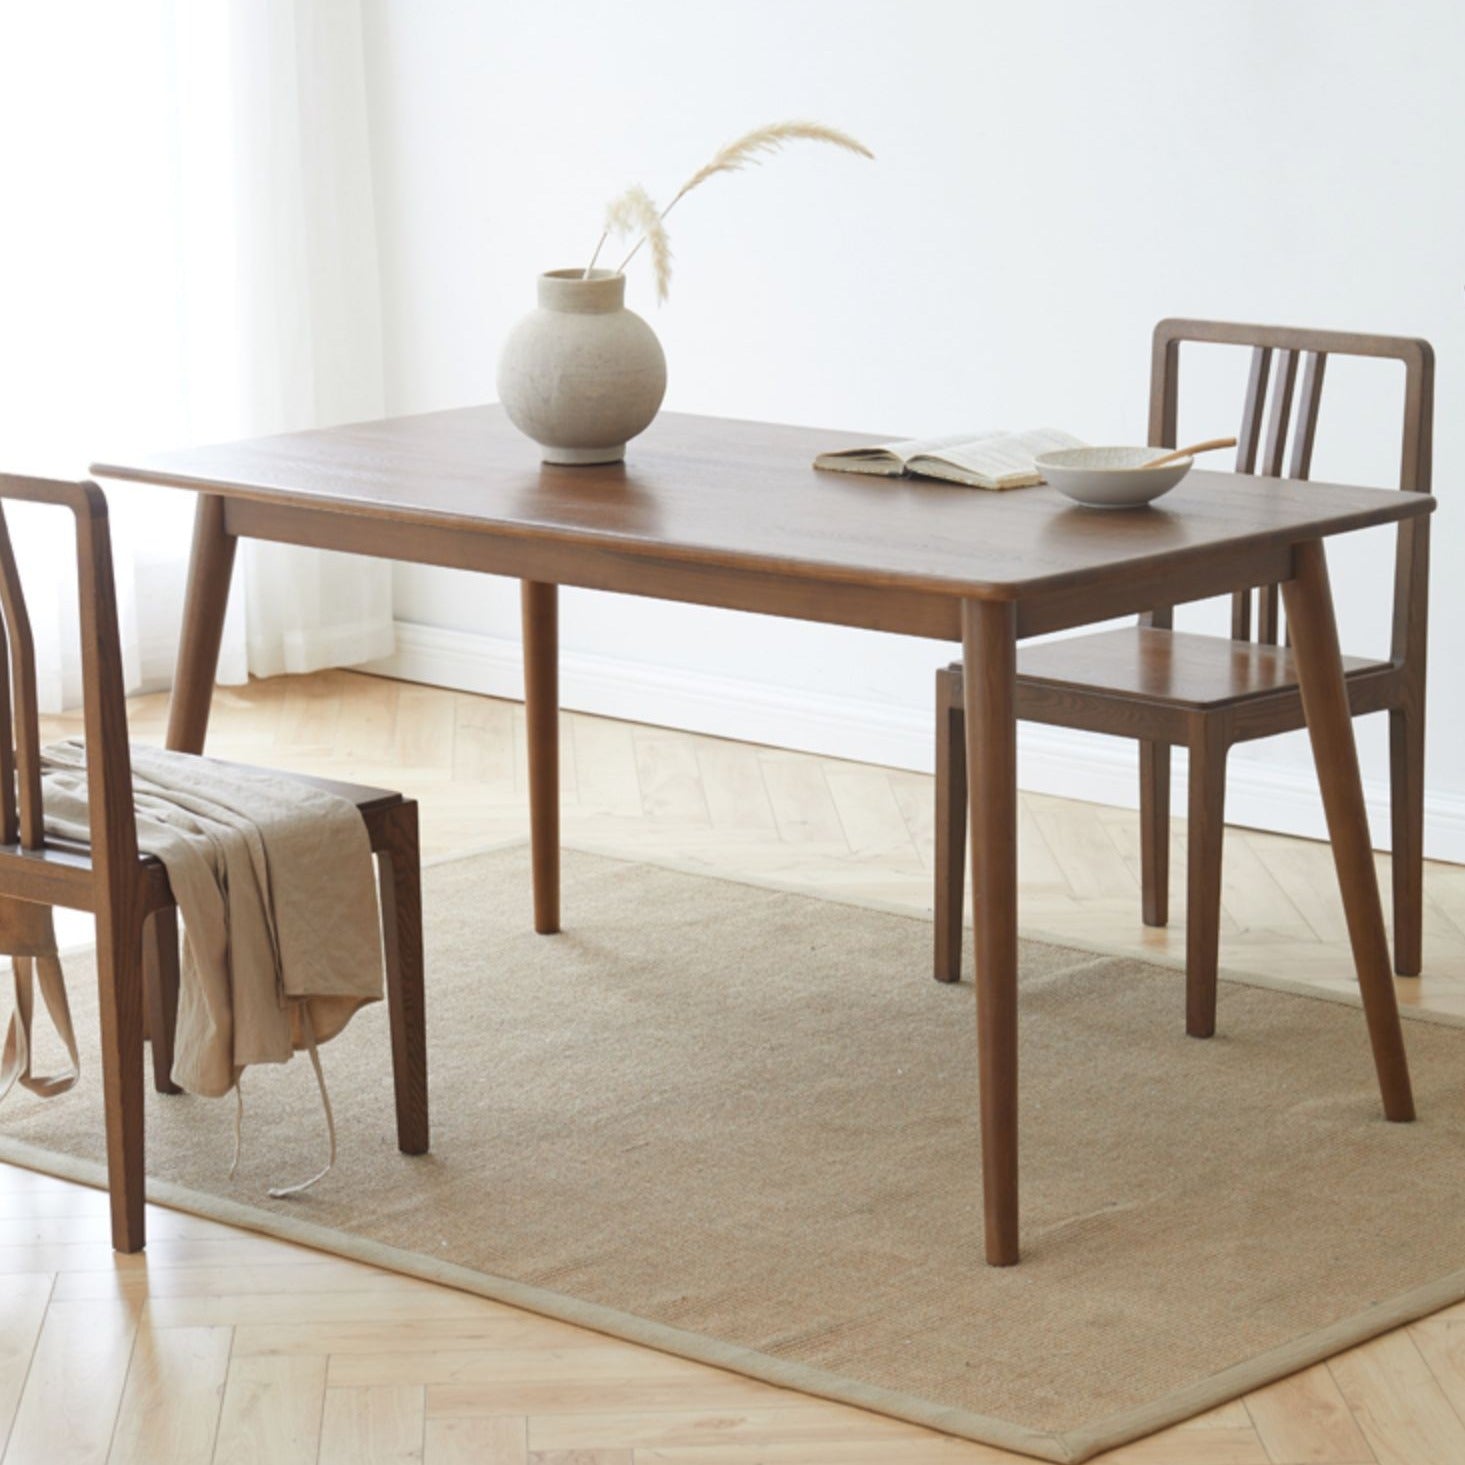 Ash solid wood suspended dining table+